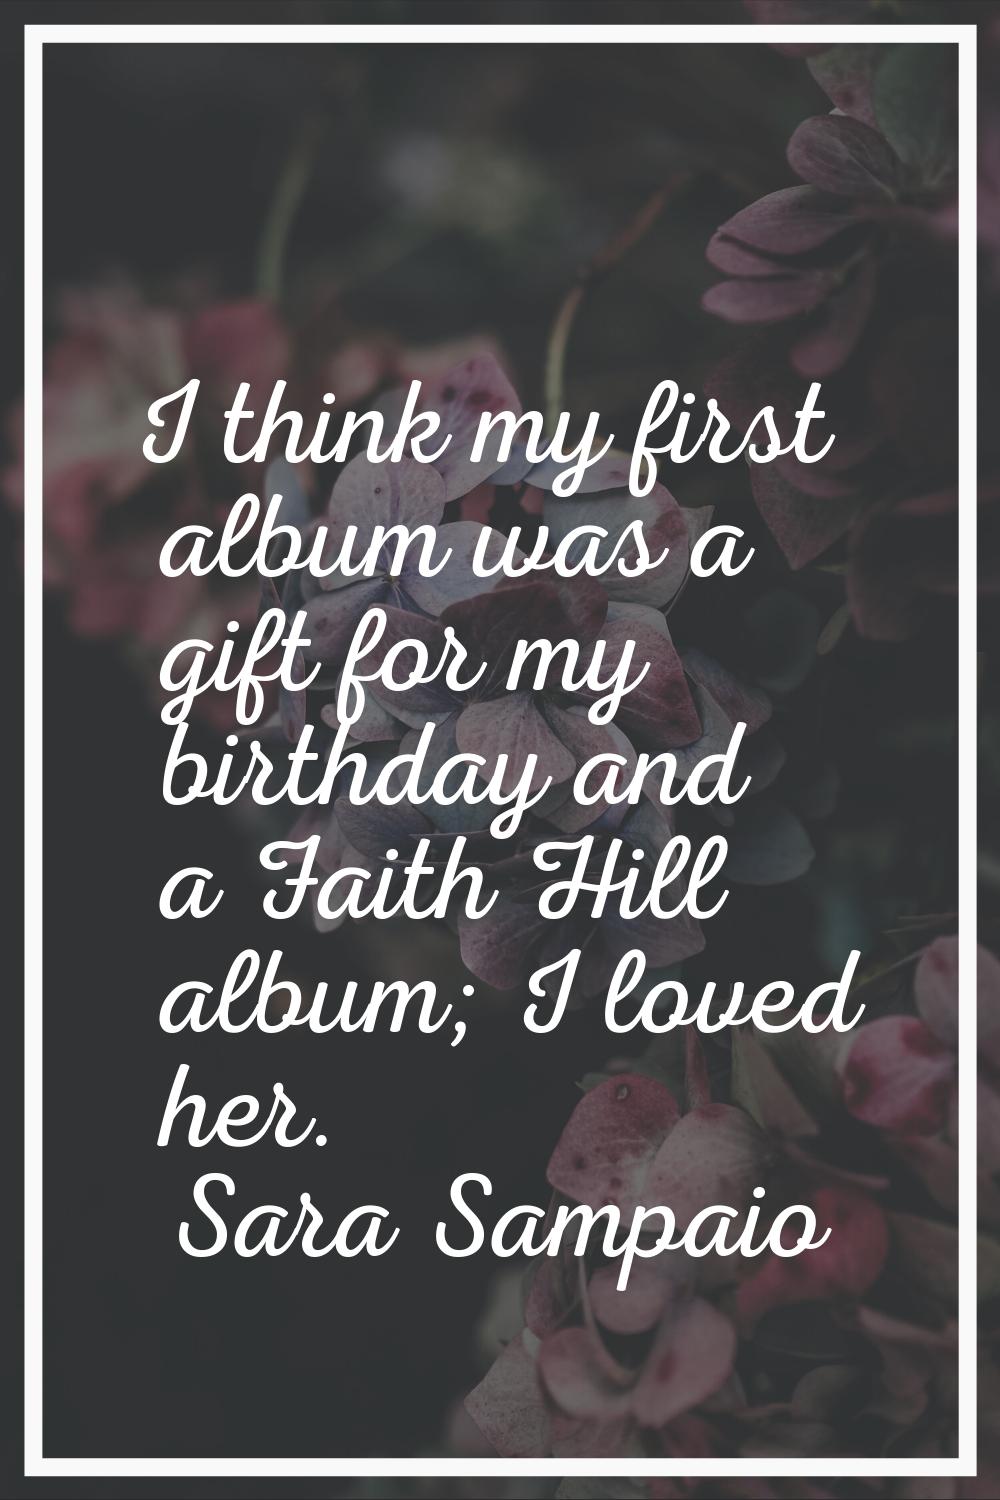 I think my first album was a gift for my birthday and a Faith Hill album; I loved her.